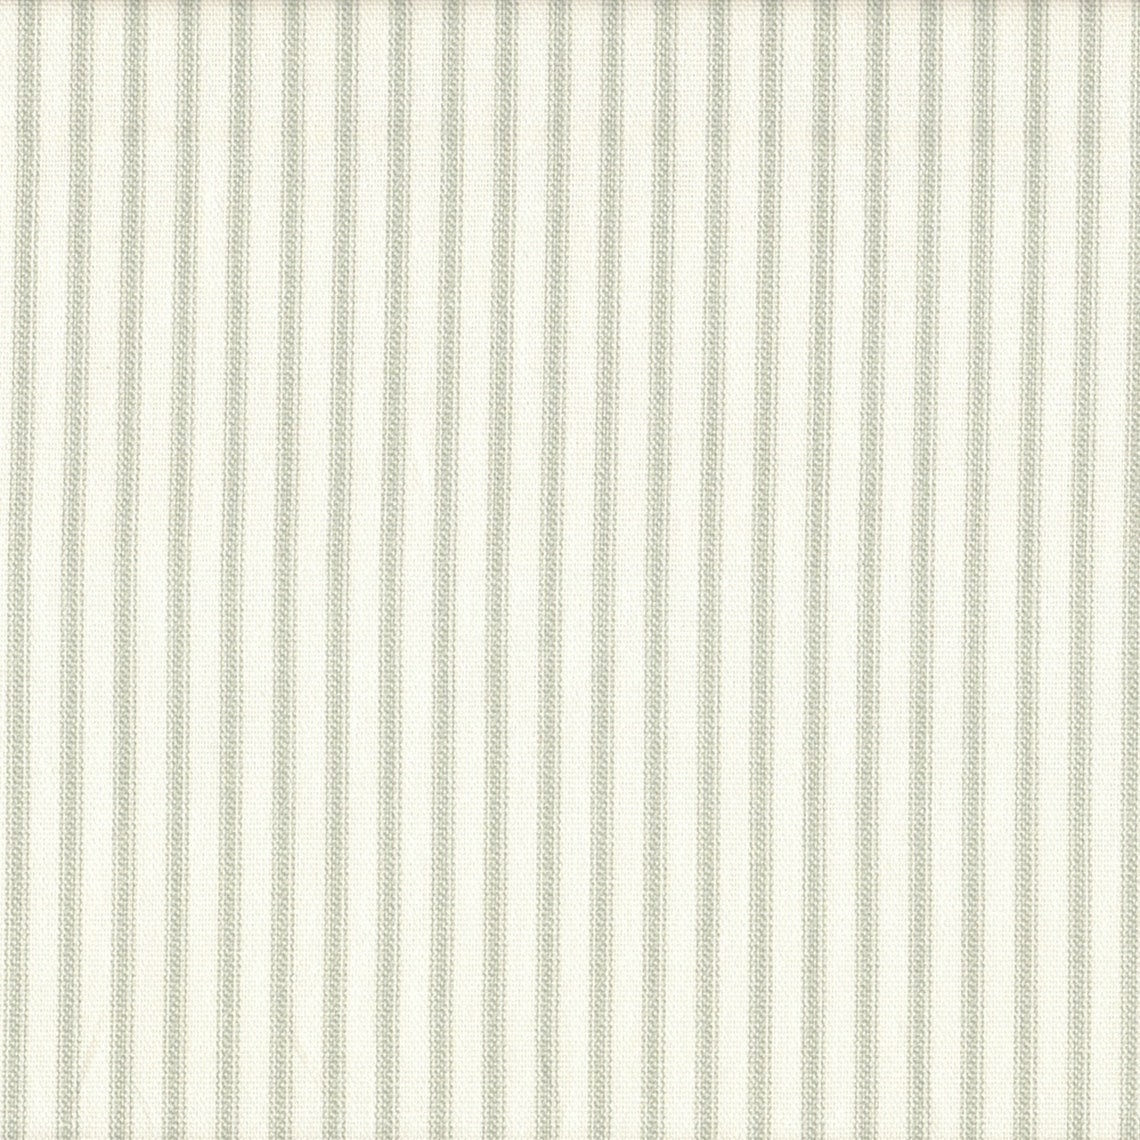 pinch pleated curtain panels pair in farmhouse pale sage green ticking stripe on cream